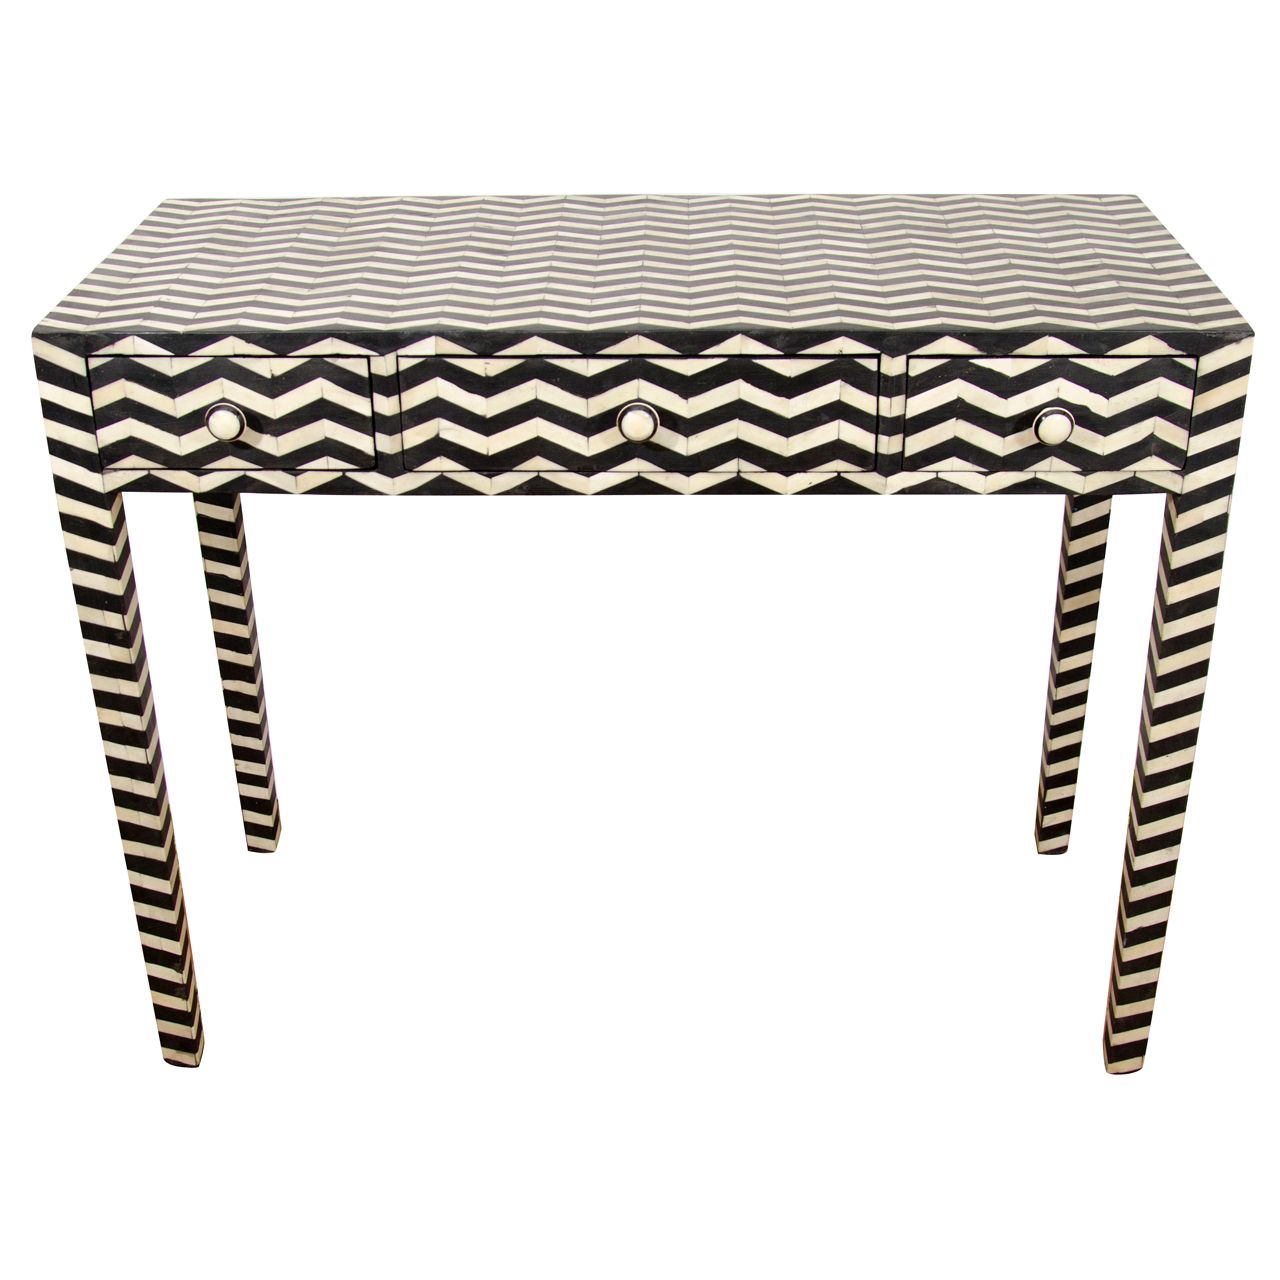 Black And White Bone Inlay Side Table | Furniture Design | Pinterest For Black And White Inlay Console Tables (Photo 2 of 30)